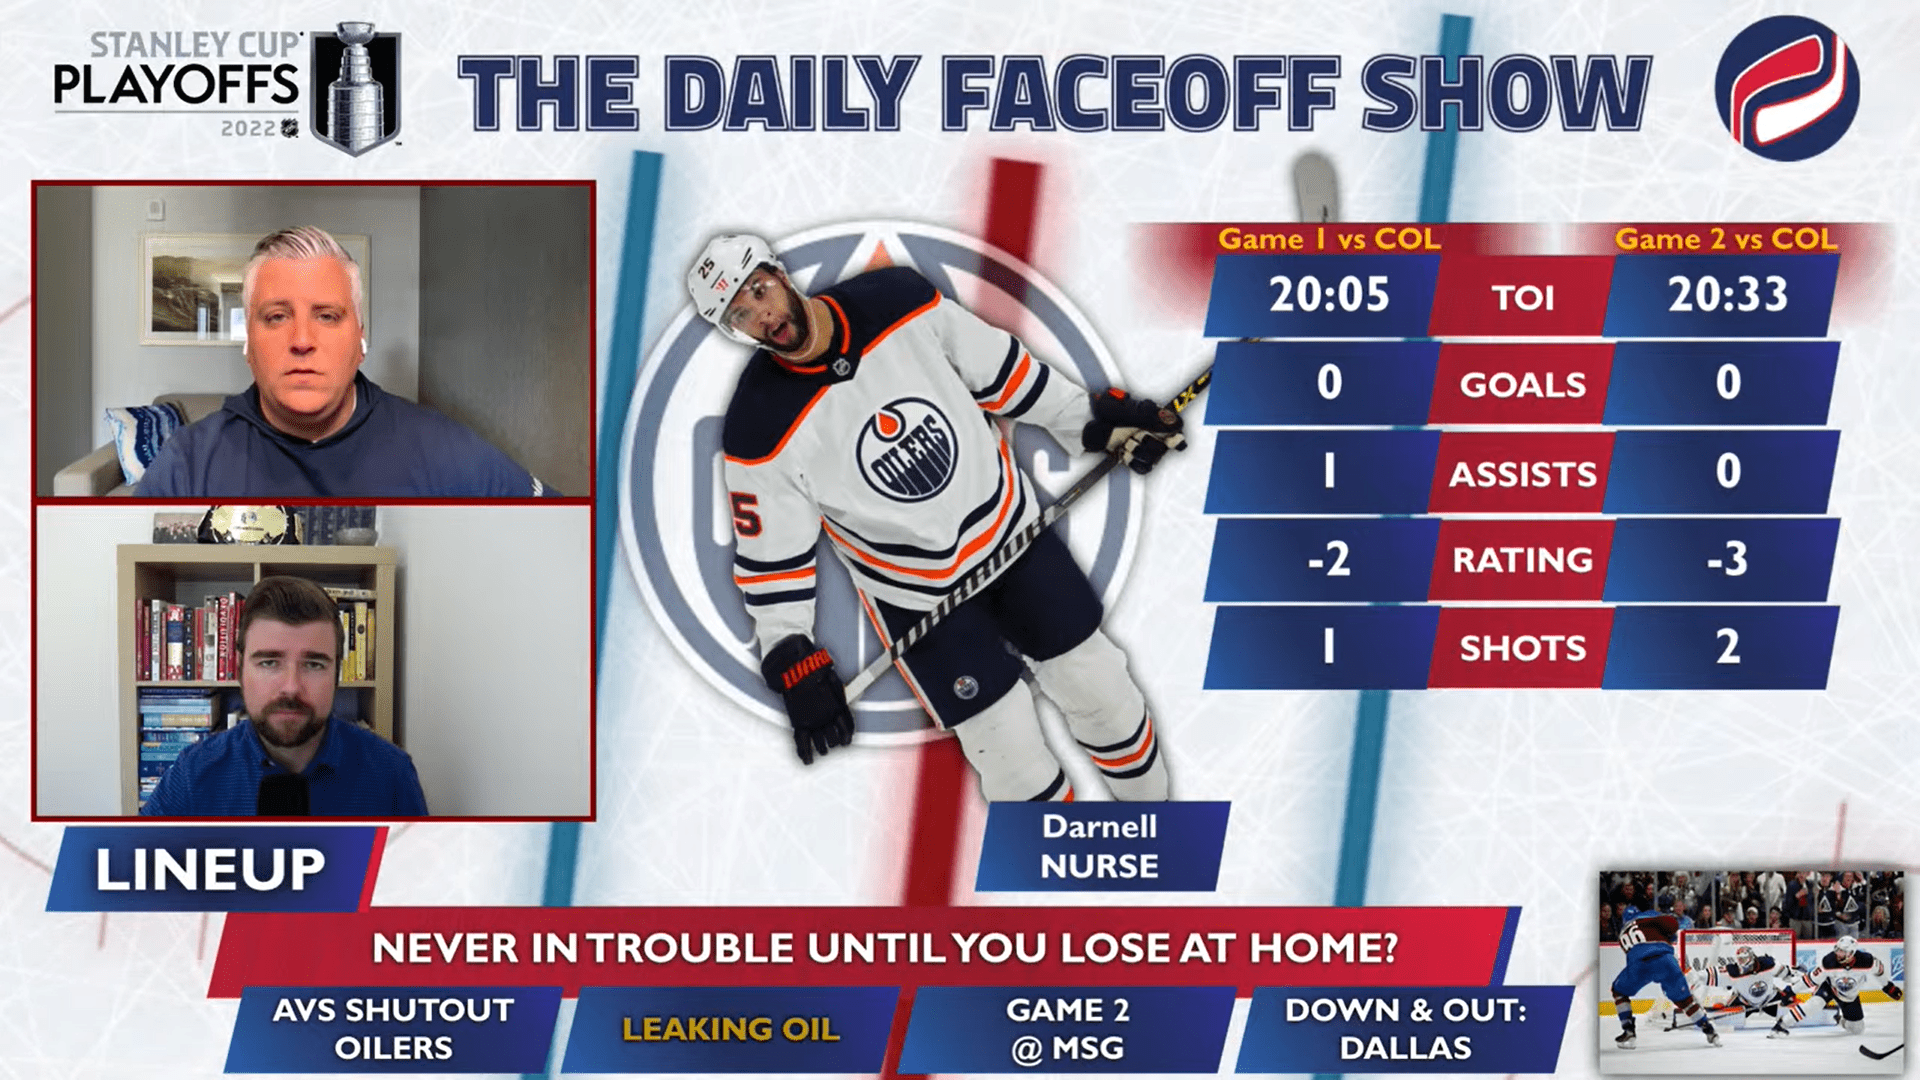 The Daily Faceoff Show: How can the Edmonton Oilers adjust in this series with Darnell Nurse’s injury?